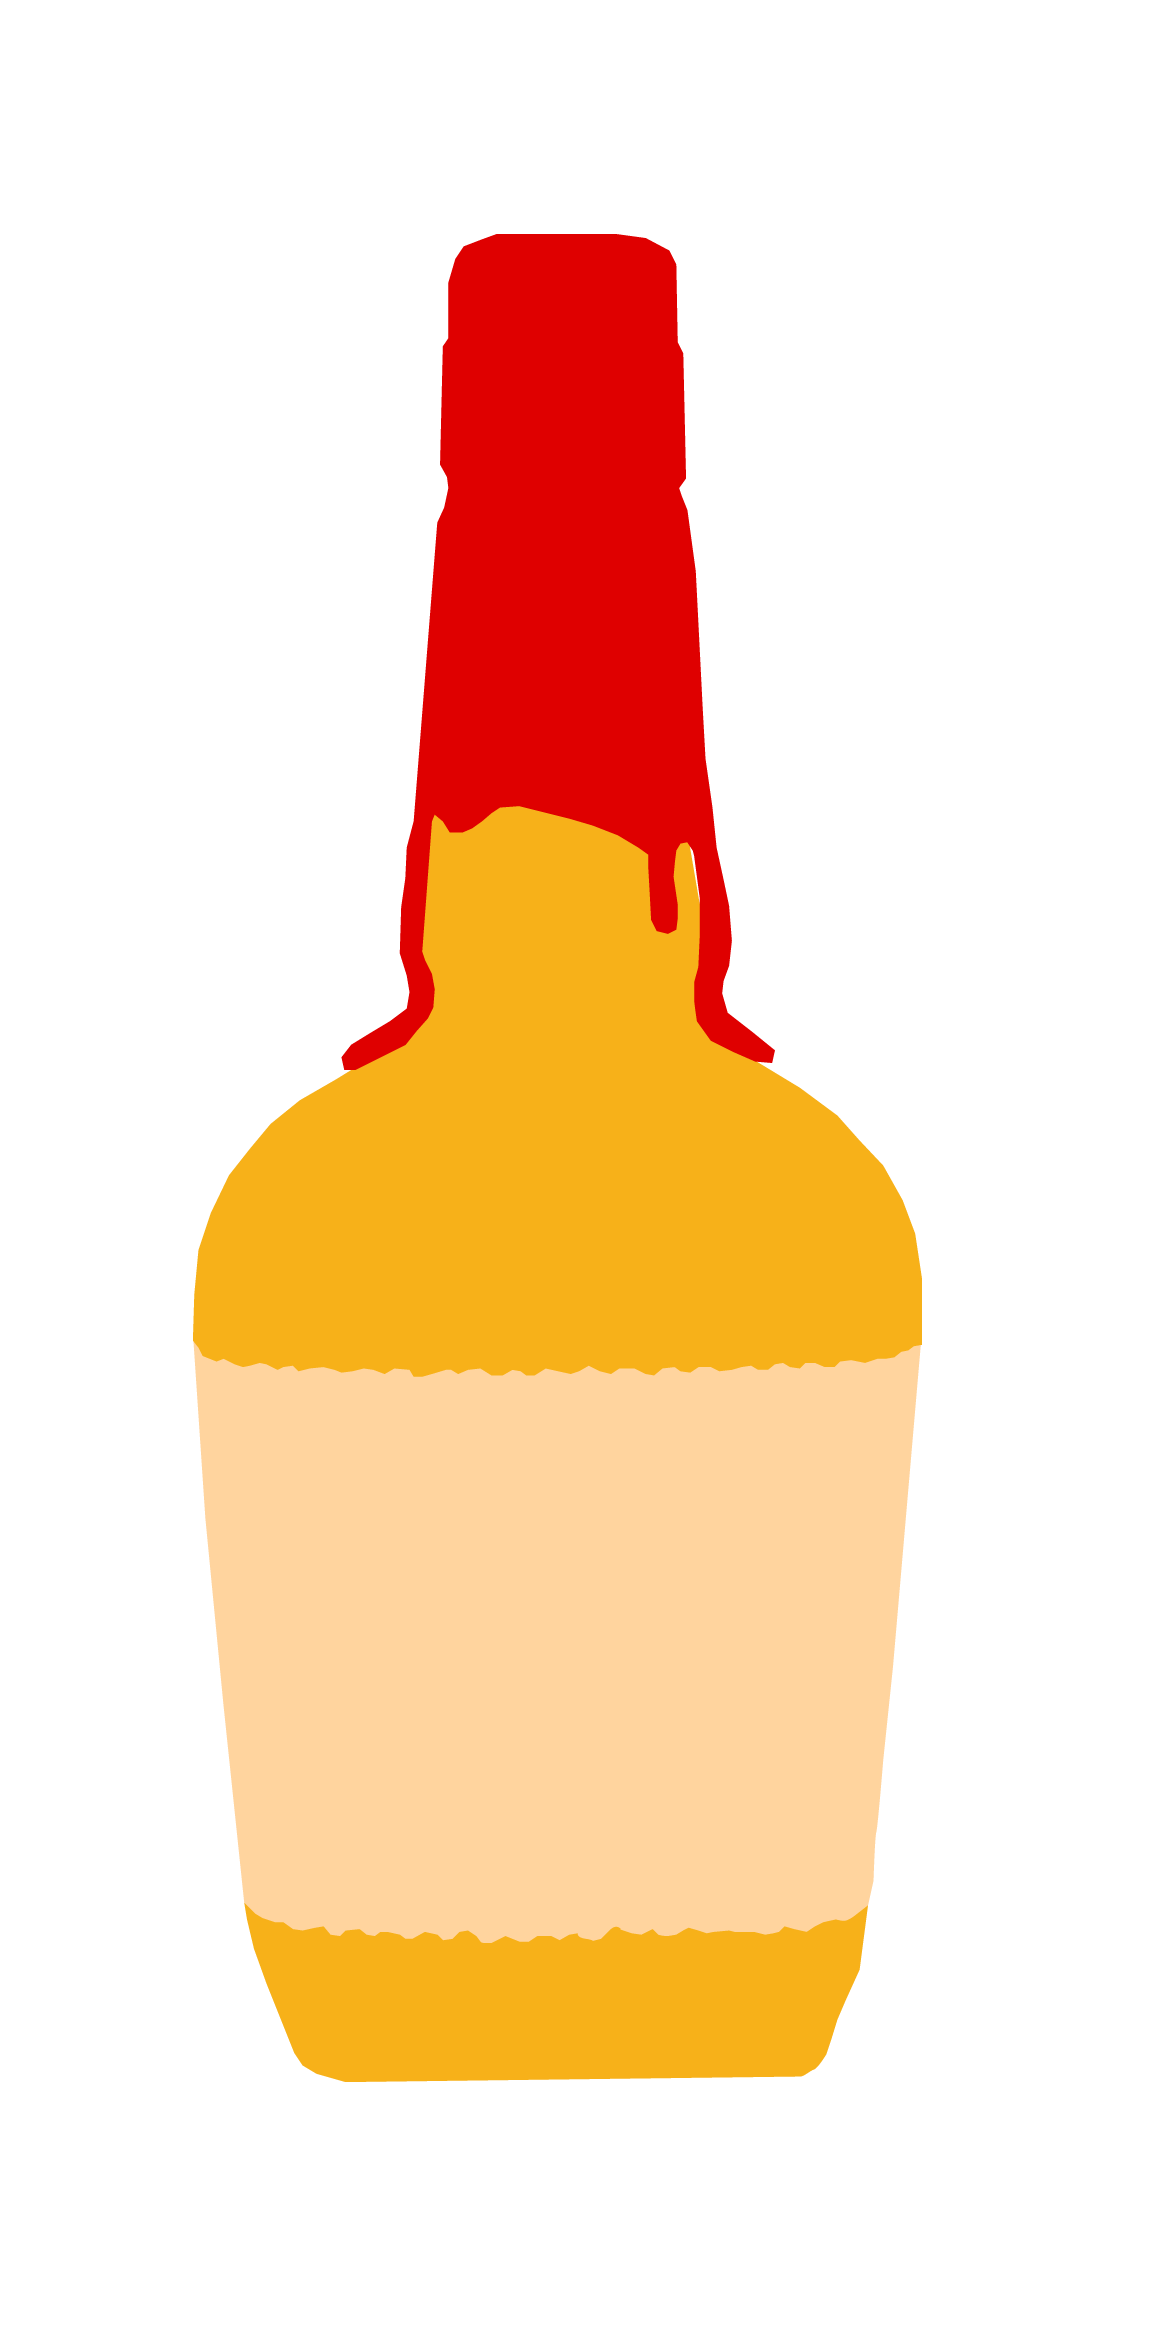 Whiskey Bottle Silhouette #1626201 (License: Personal Use) .